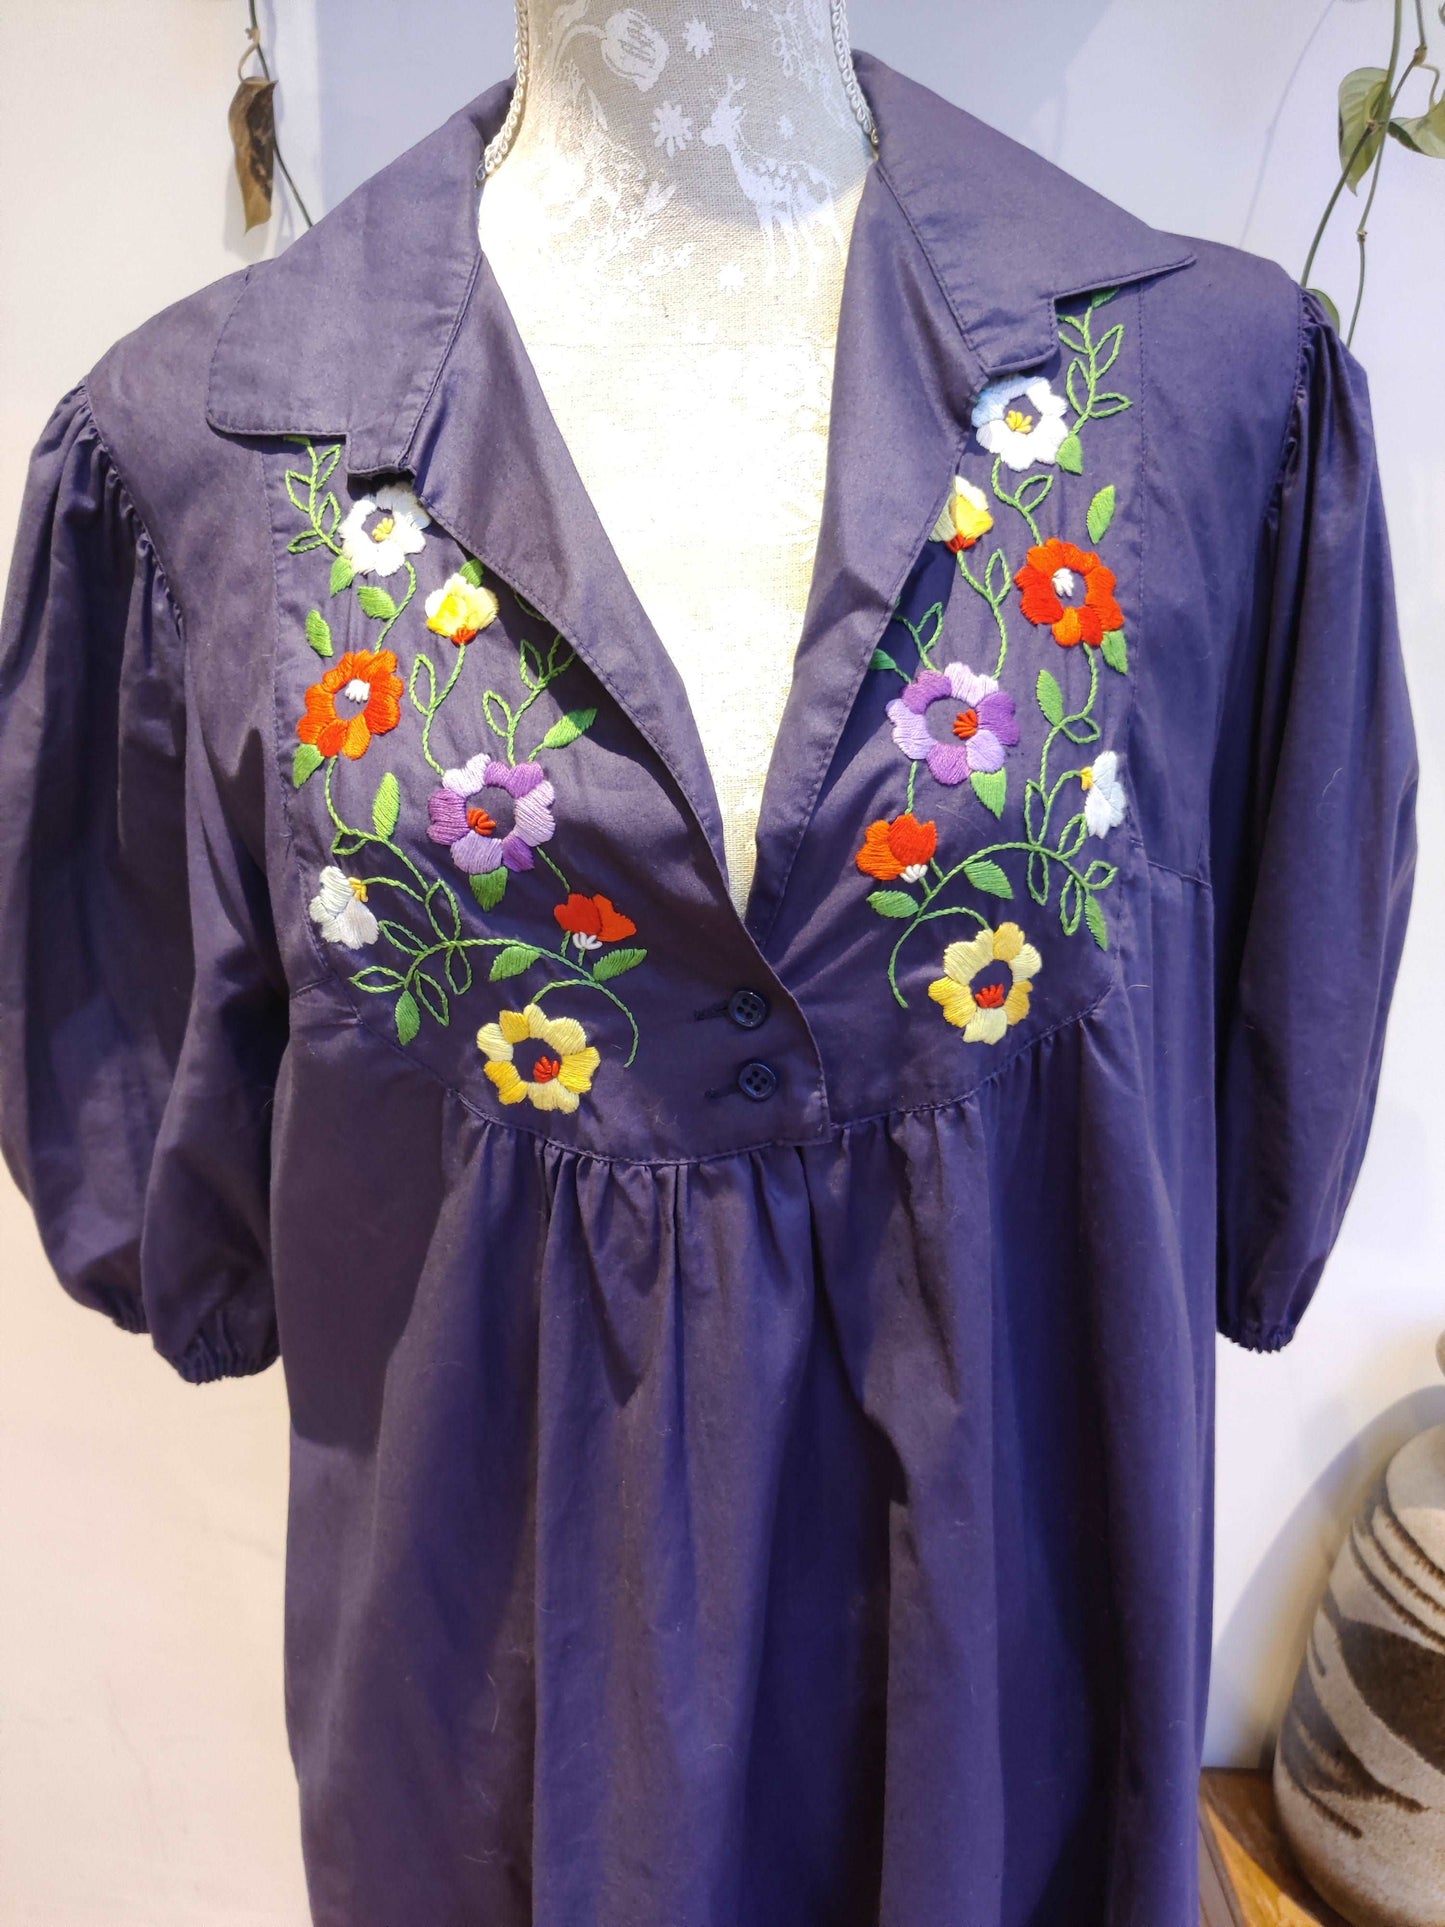 Beautiful blue smock dress with embroidered bib detail.